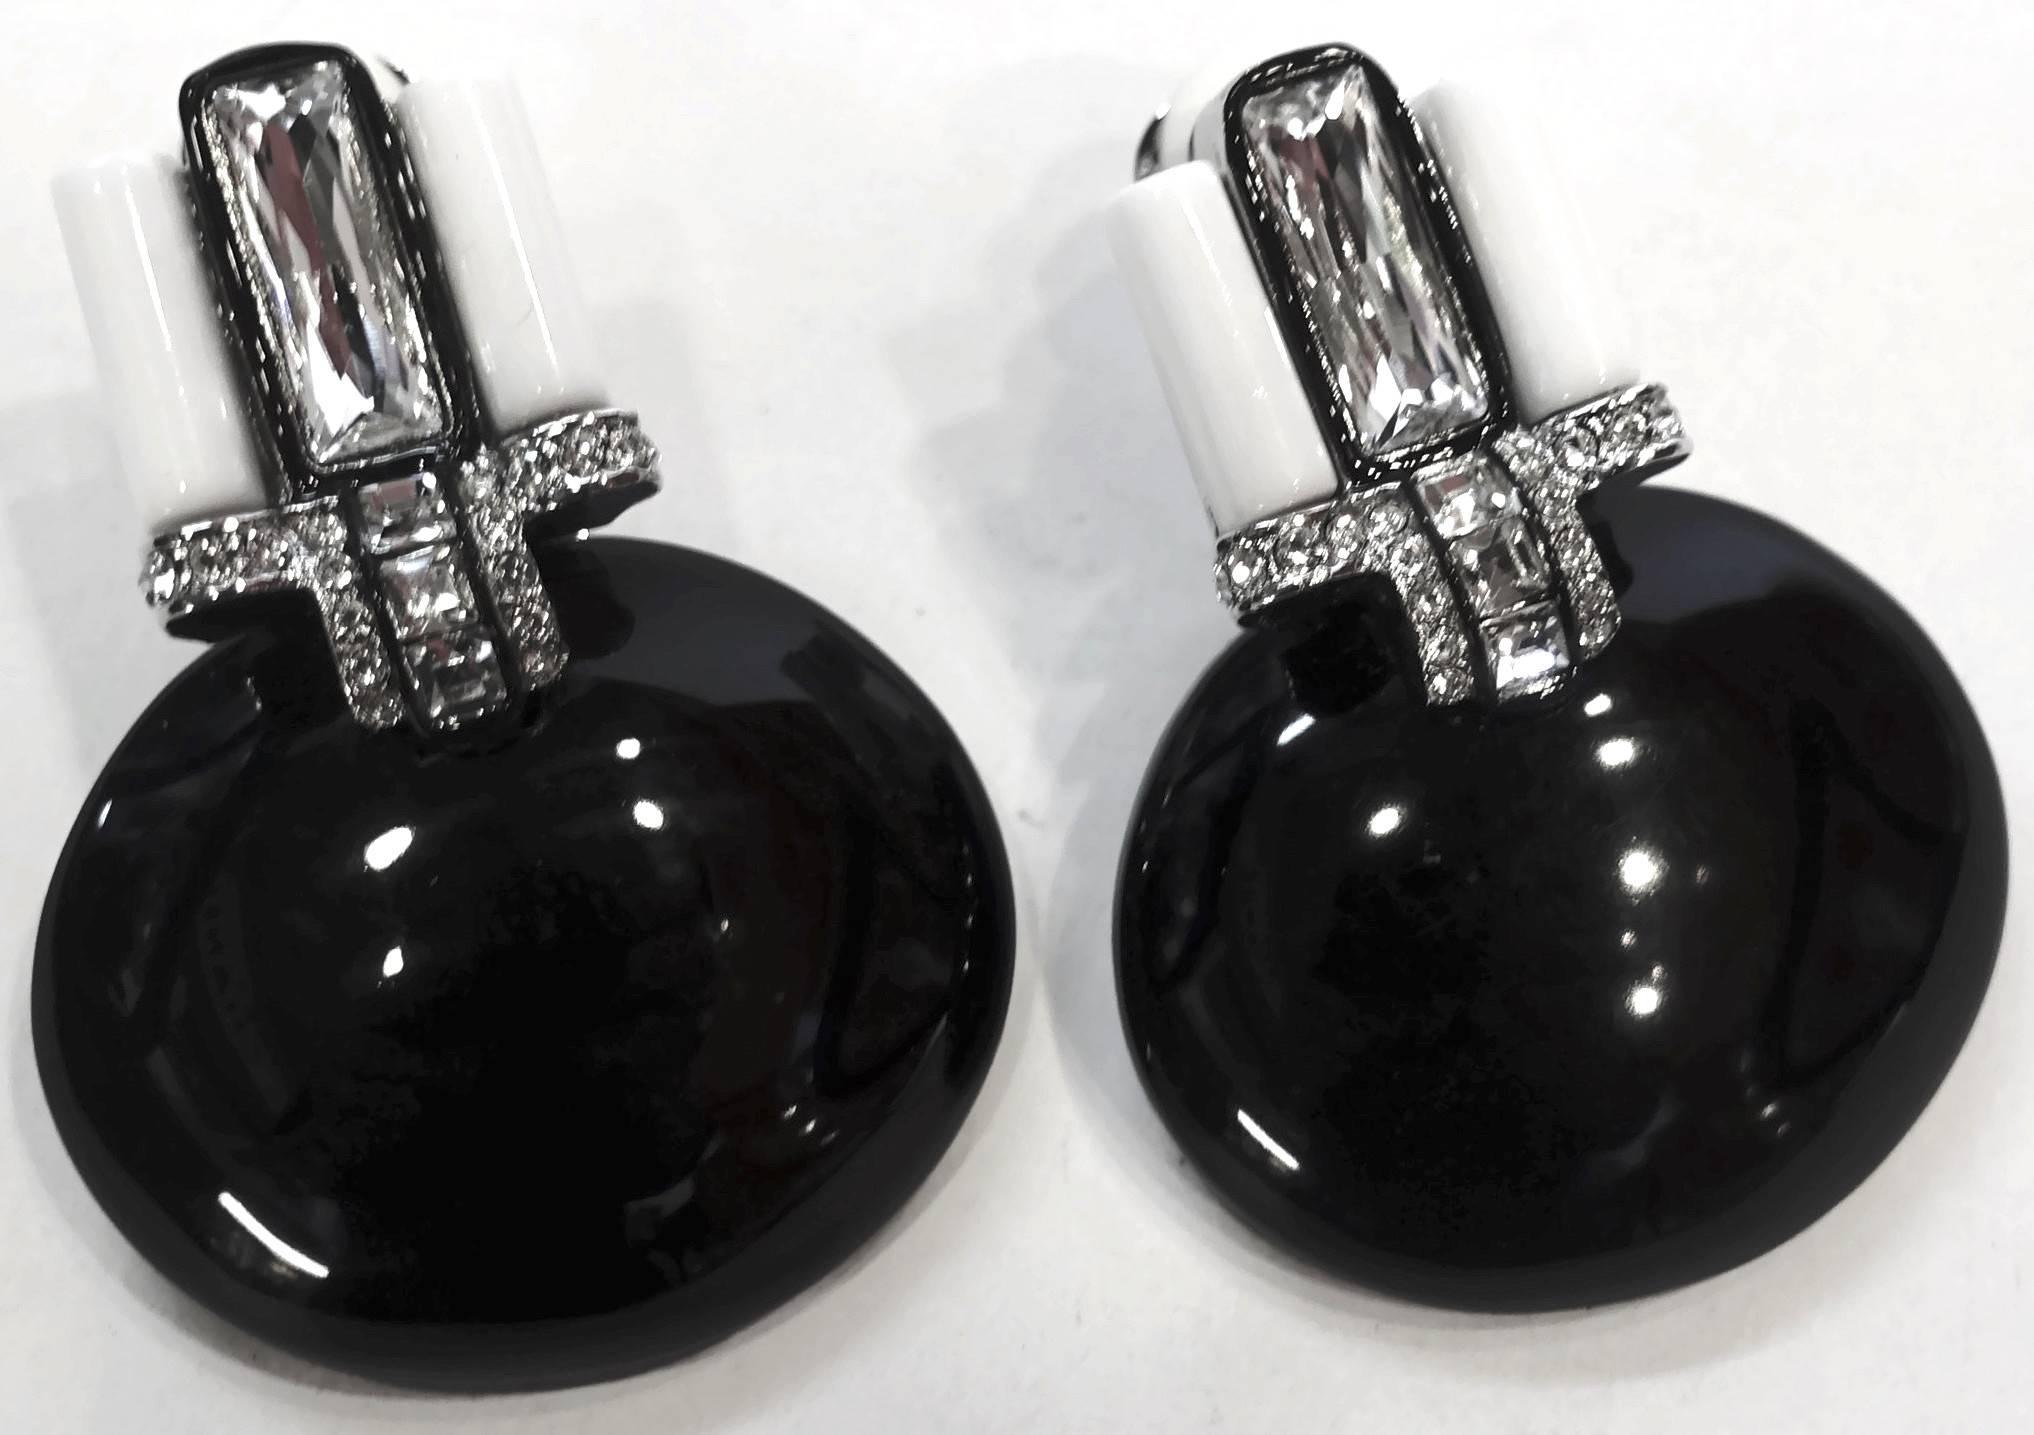 These signed Kenneth Lane earrings feature faux onyx with white enameling with crystal accents in a silver-plated base metal setting. In excellent condition, these clip earrings measure 2” x 1-1/2” and are signed “KJL”.